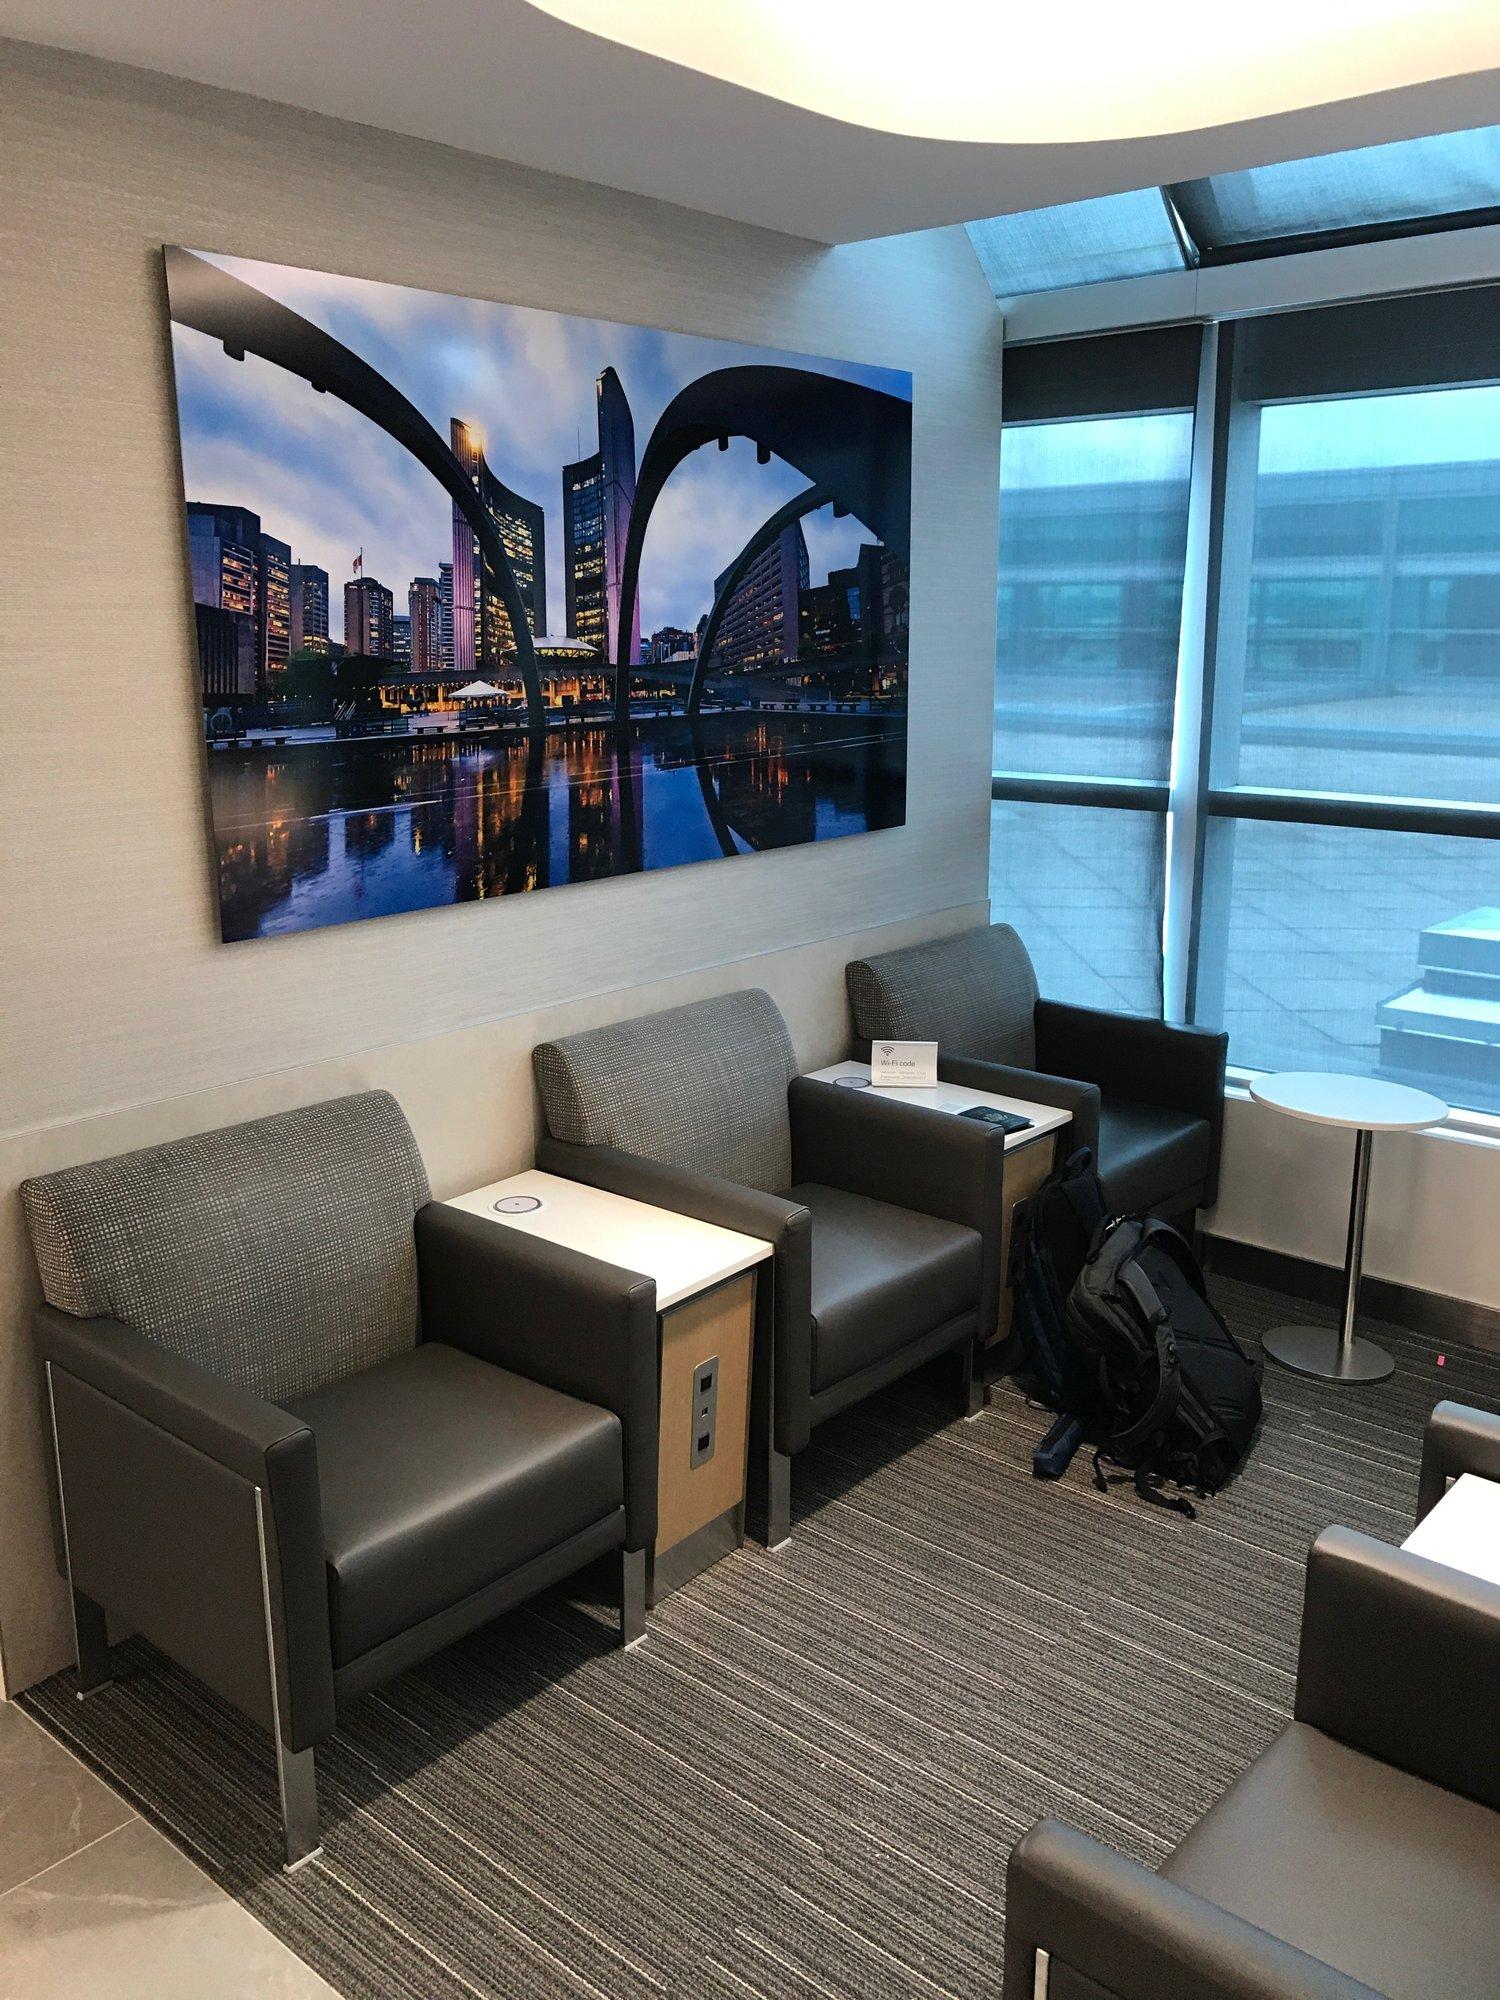 American Airlines Admirals Club image 2 of 9